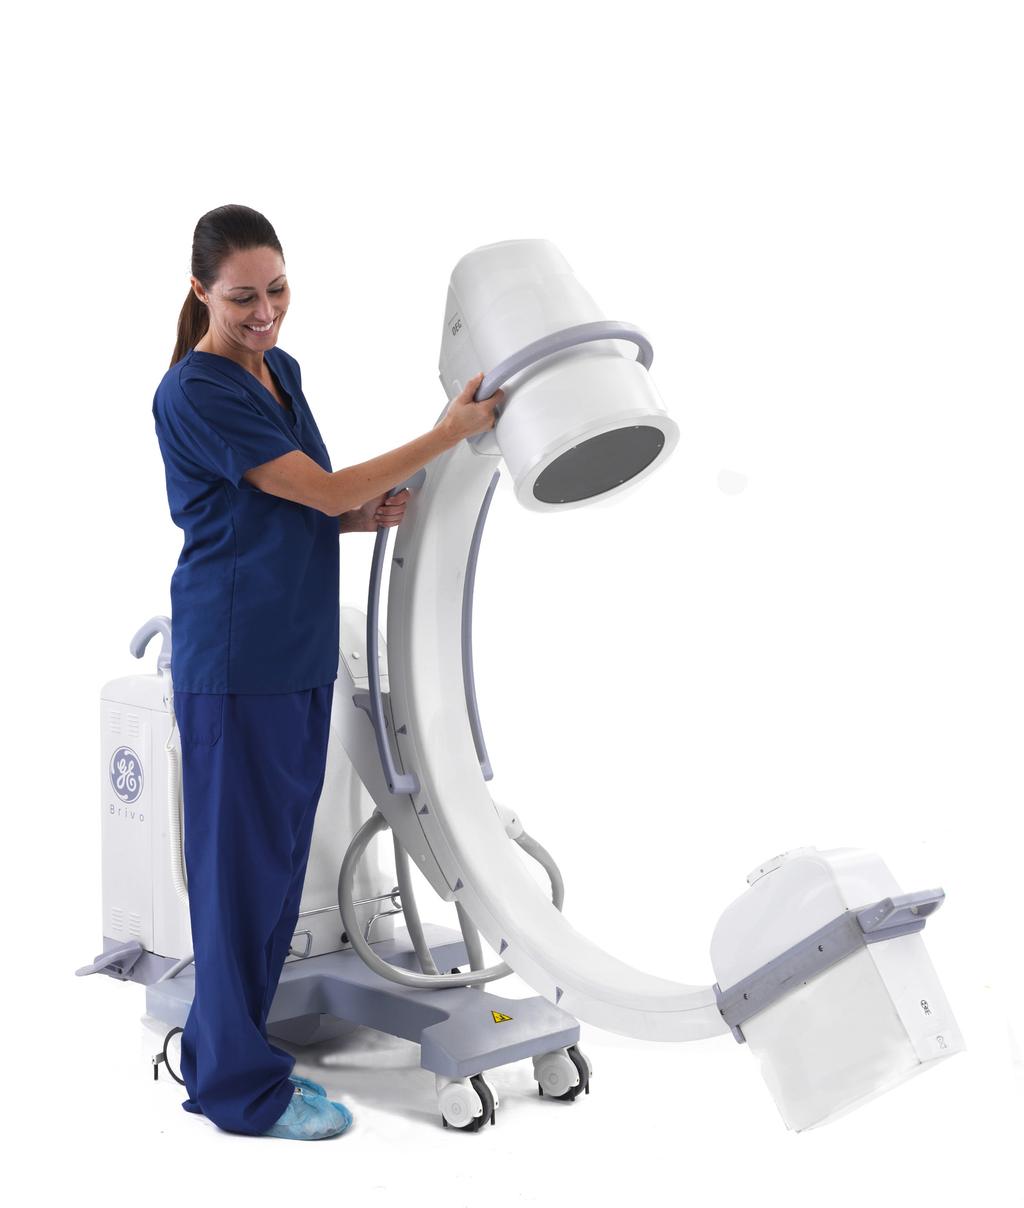 Confident. Your staff needs a C-arm that consistently delivers dependable and accurate results in real time.